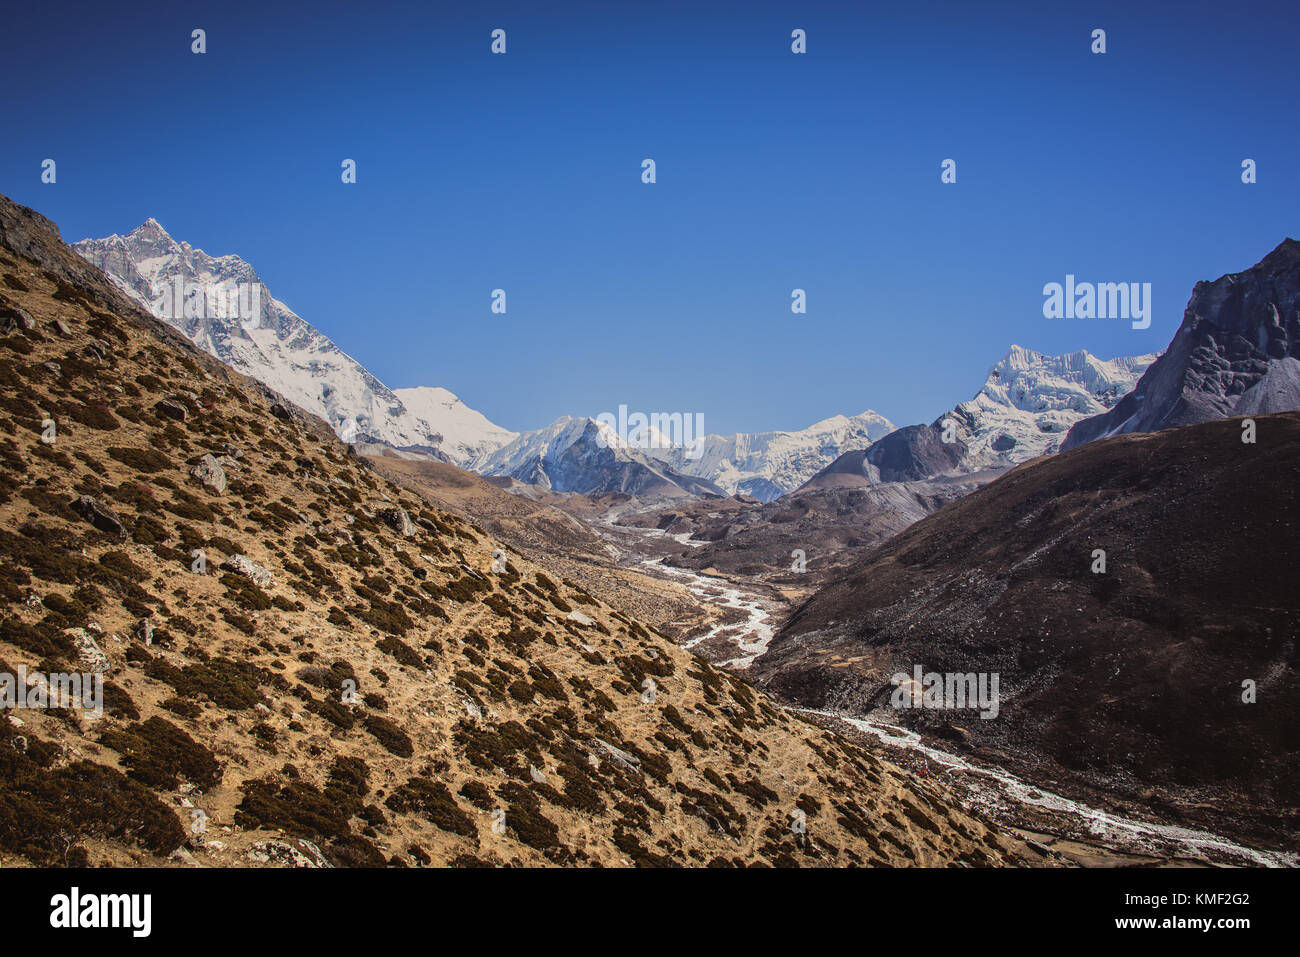 High altitude valley and landscape in Himalayas, Nepal Stock Photo